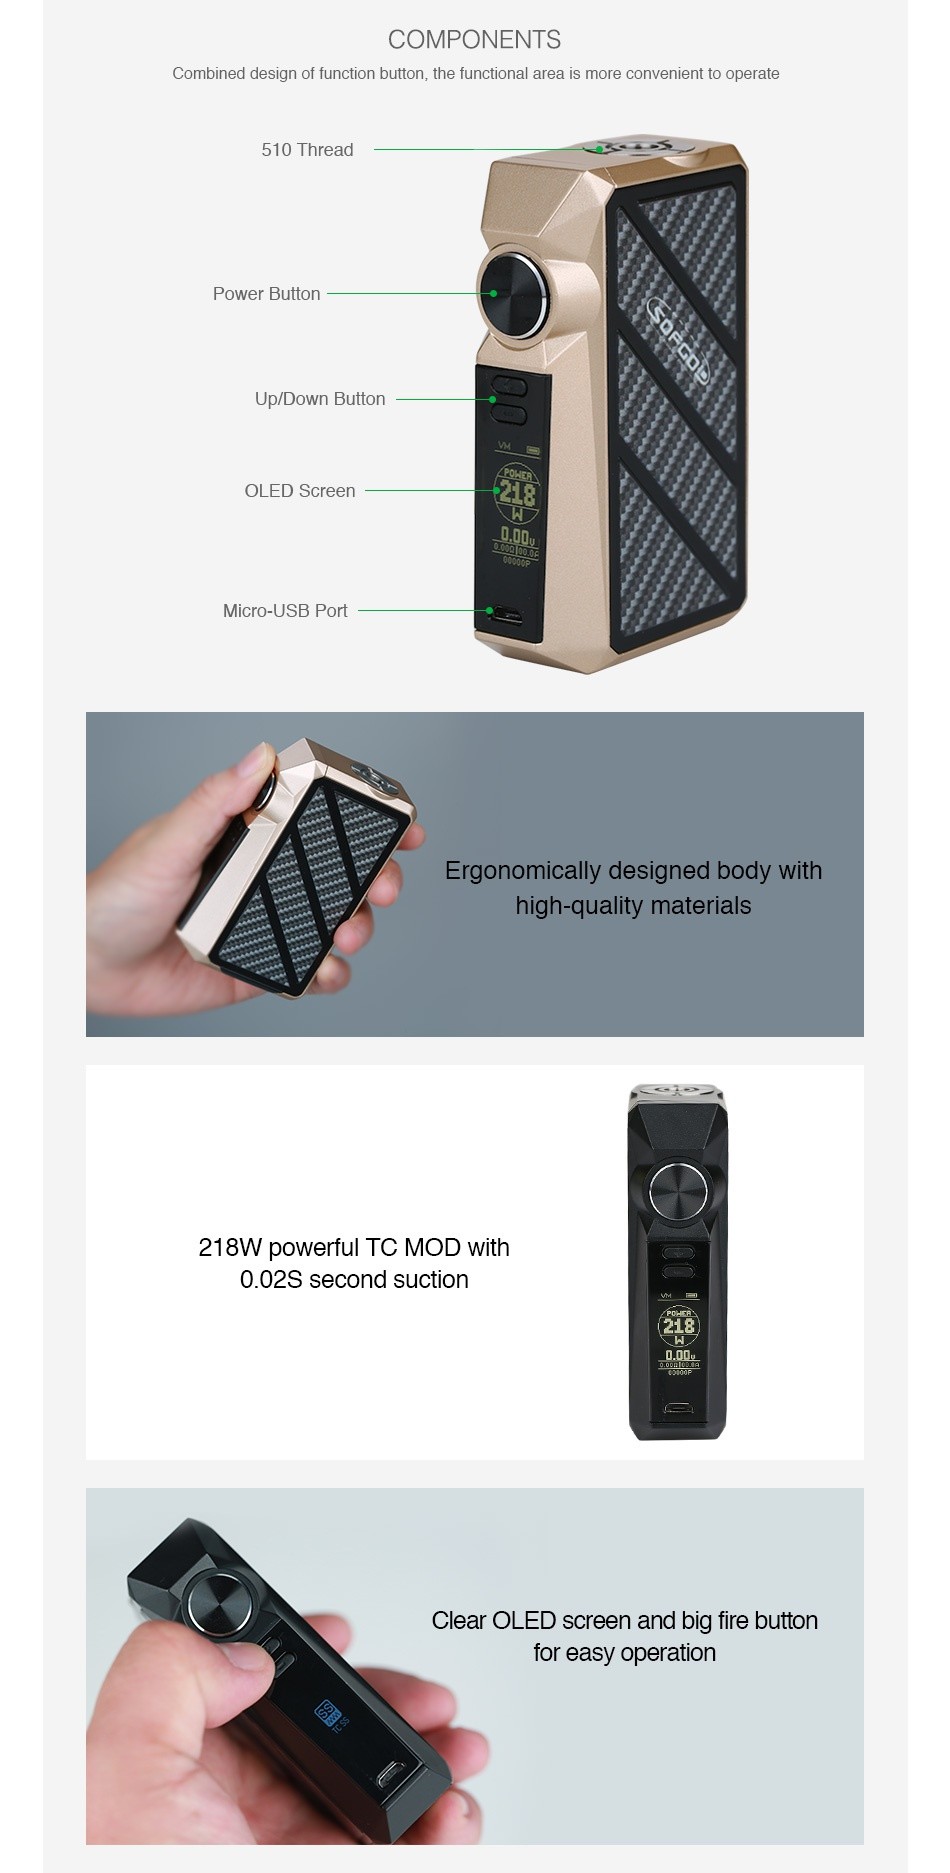 SOFGOD R03 218W TC Box MOD COMPONENTS Combined design of function button  the functional area is more convenient to operate 510 Thread Power Button Up Down Button OLED Screen Micro USB Port Ergonomically designed body with high quality materials 218W powerful TC mod with 0 02S second suction  218  Clear oLED screen and bia fire button for easy operation